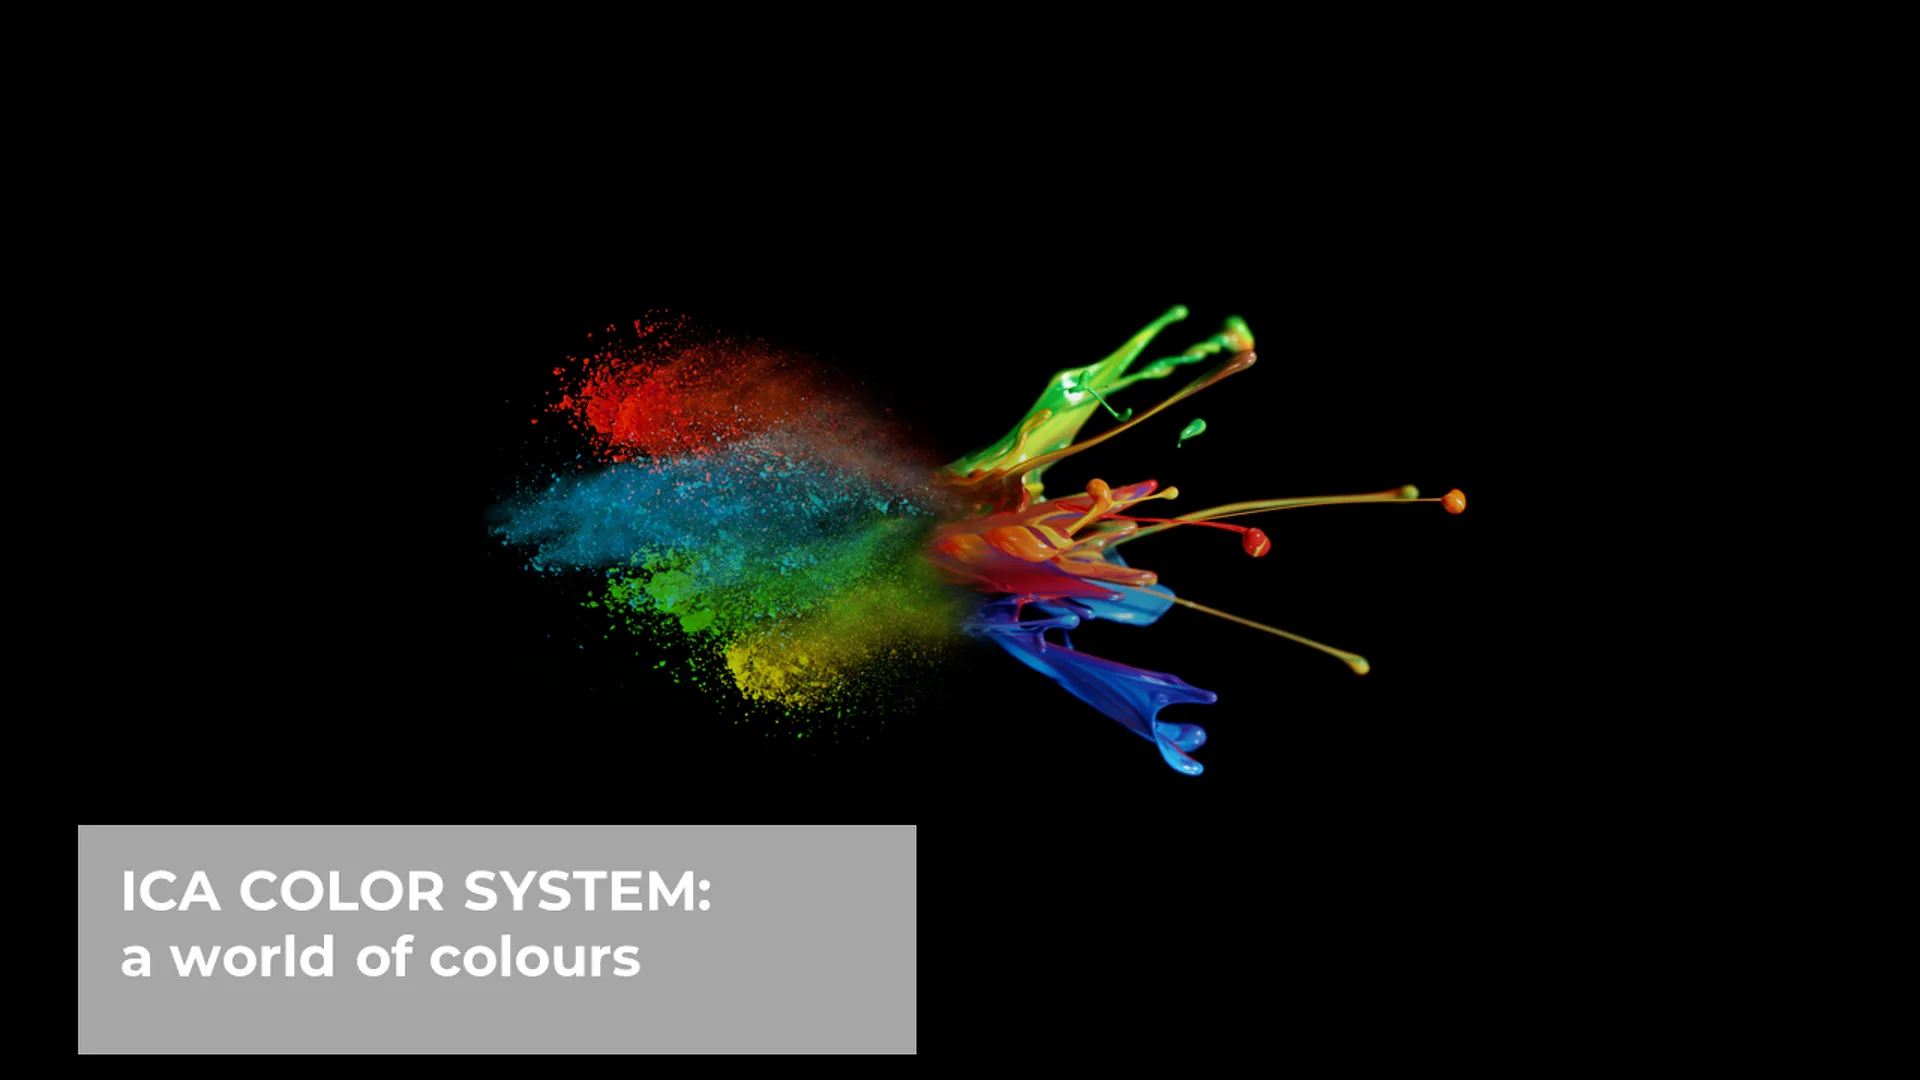 ICA COLOR SYSTEM: a world of colours